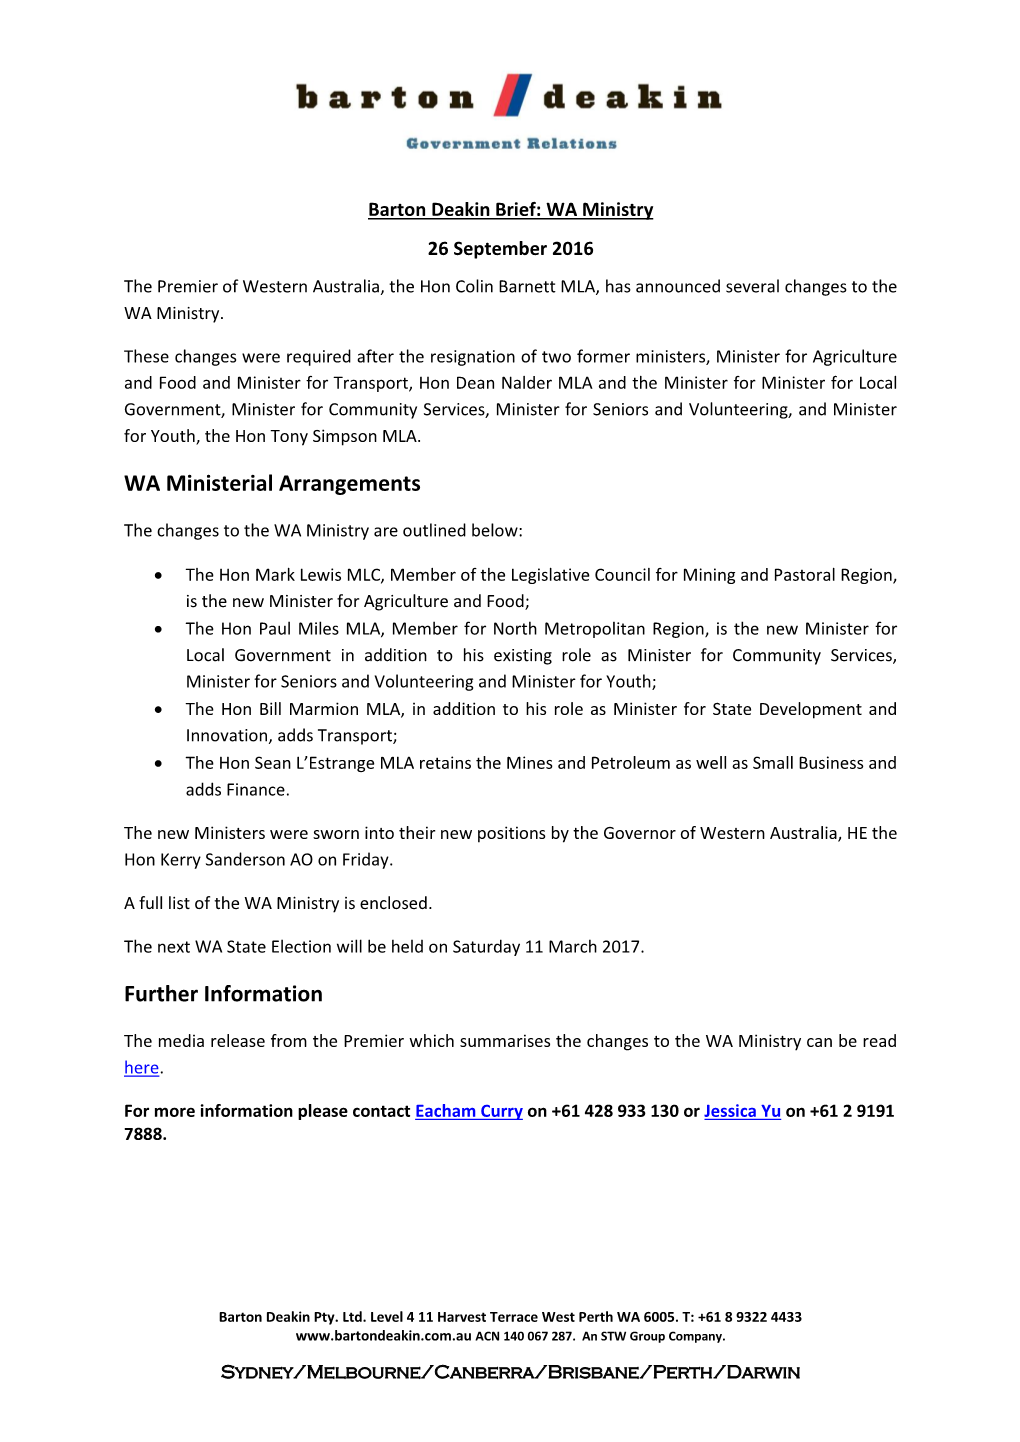 WA Ministerial Arrangements Further Information